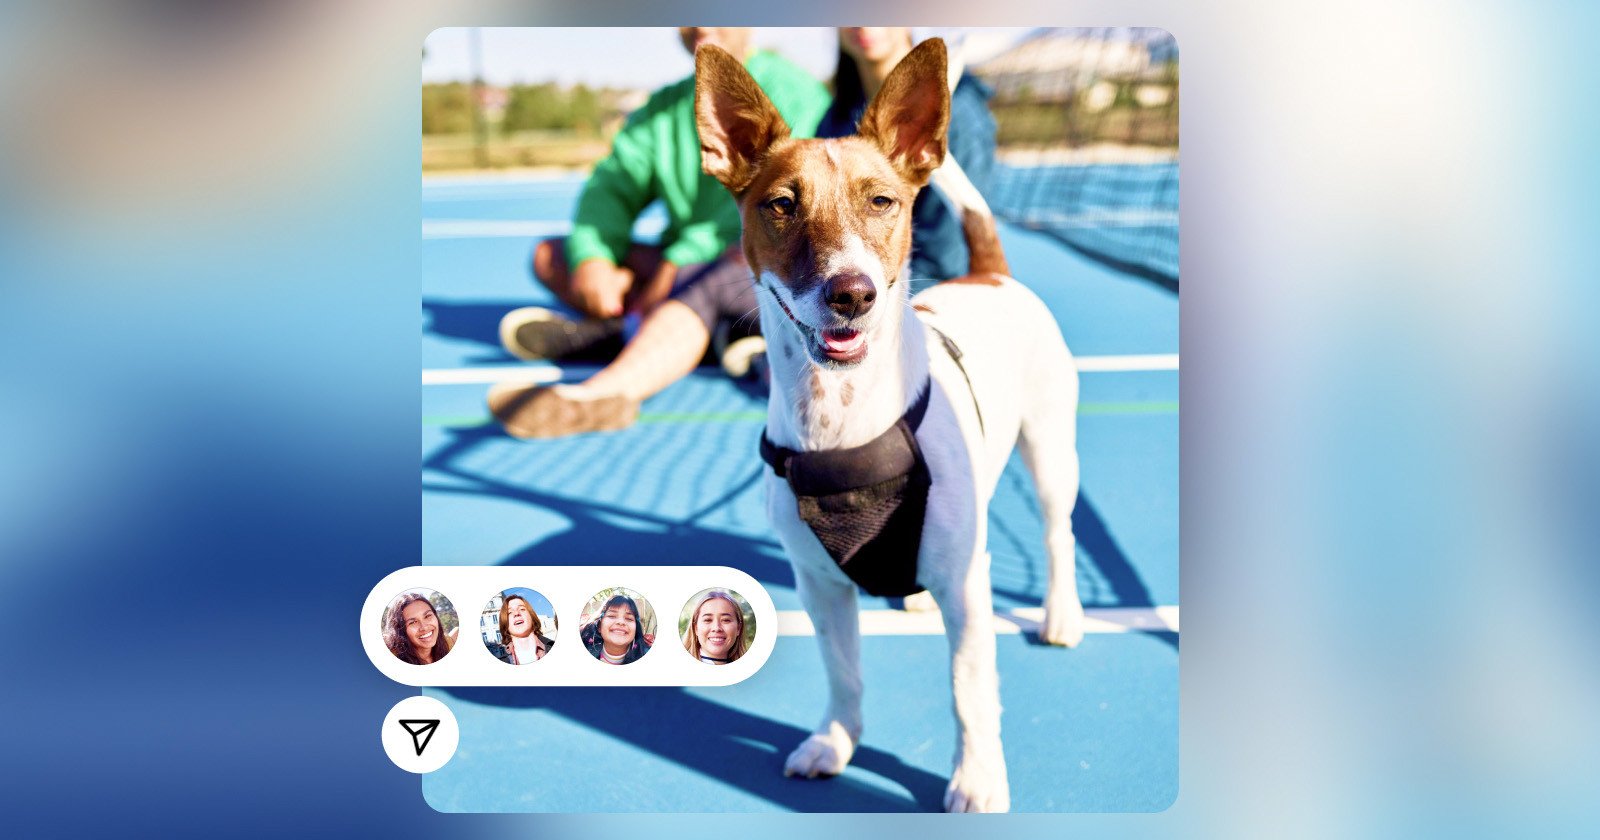  instagram launches multiple enhanced messaging features 